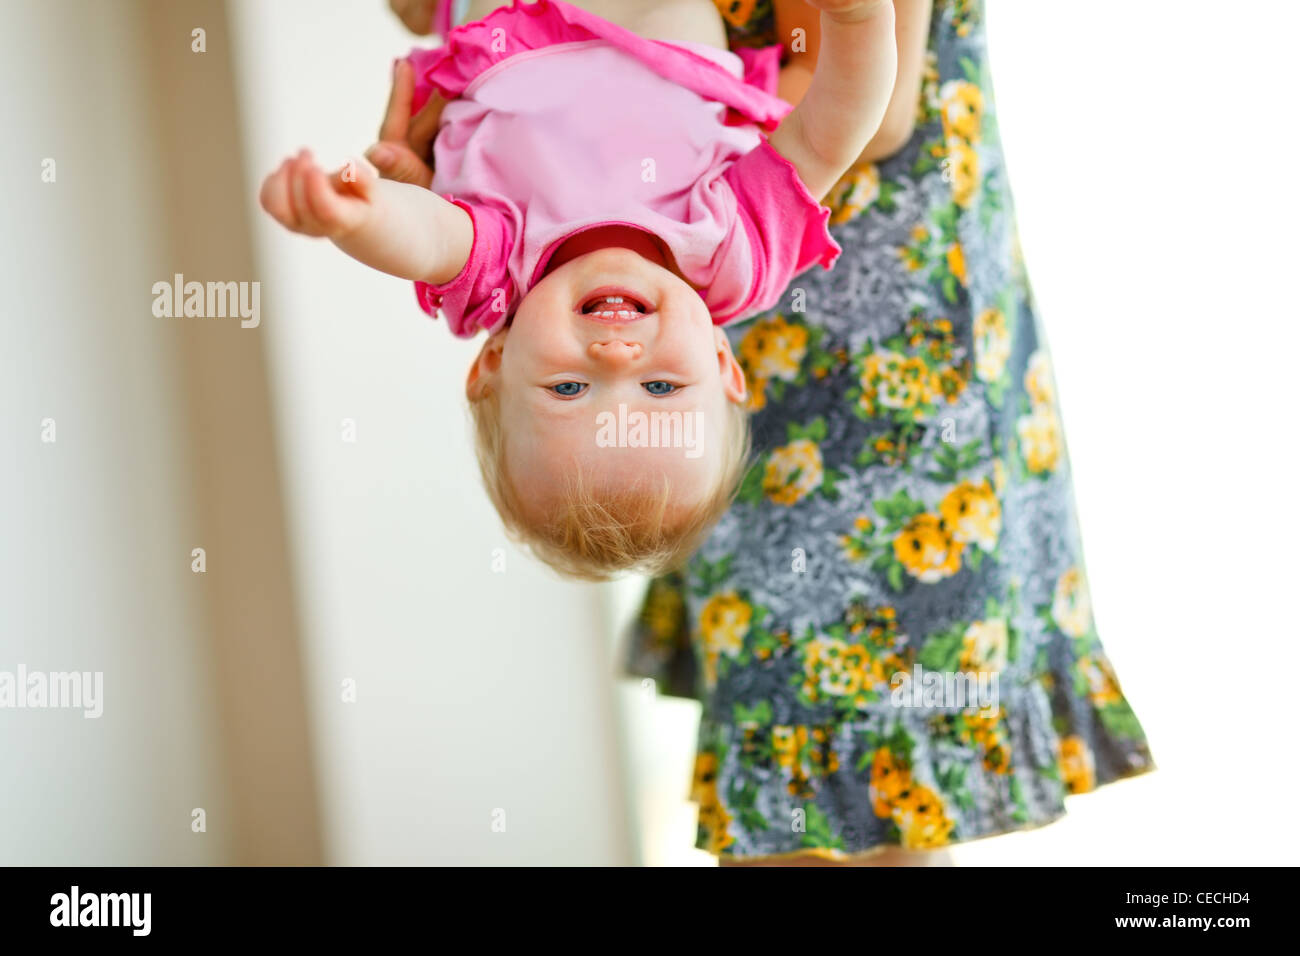 Mother holding smiling baby upside down Stock Photo